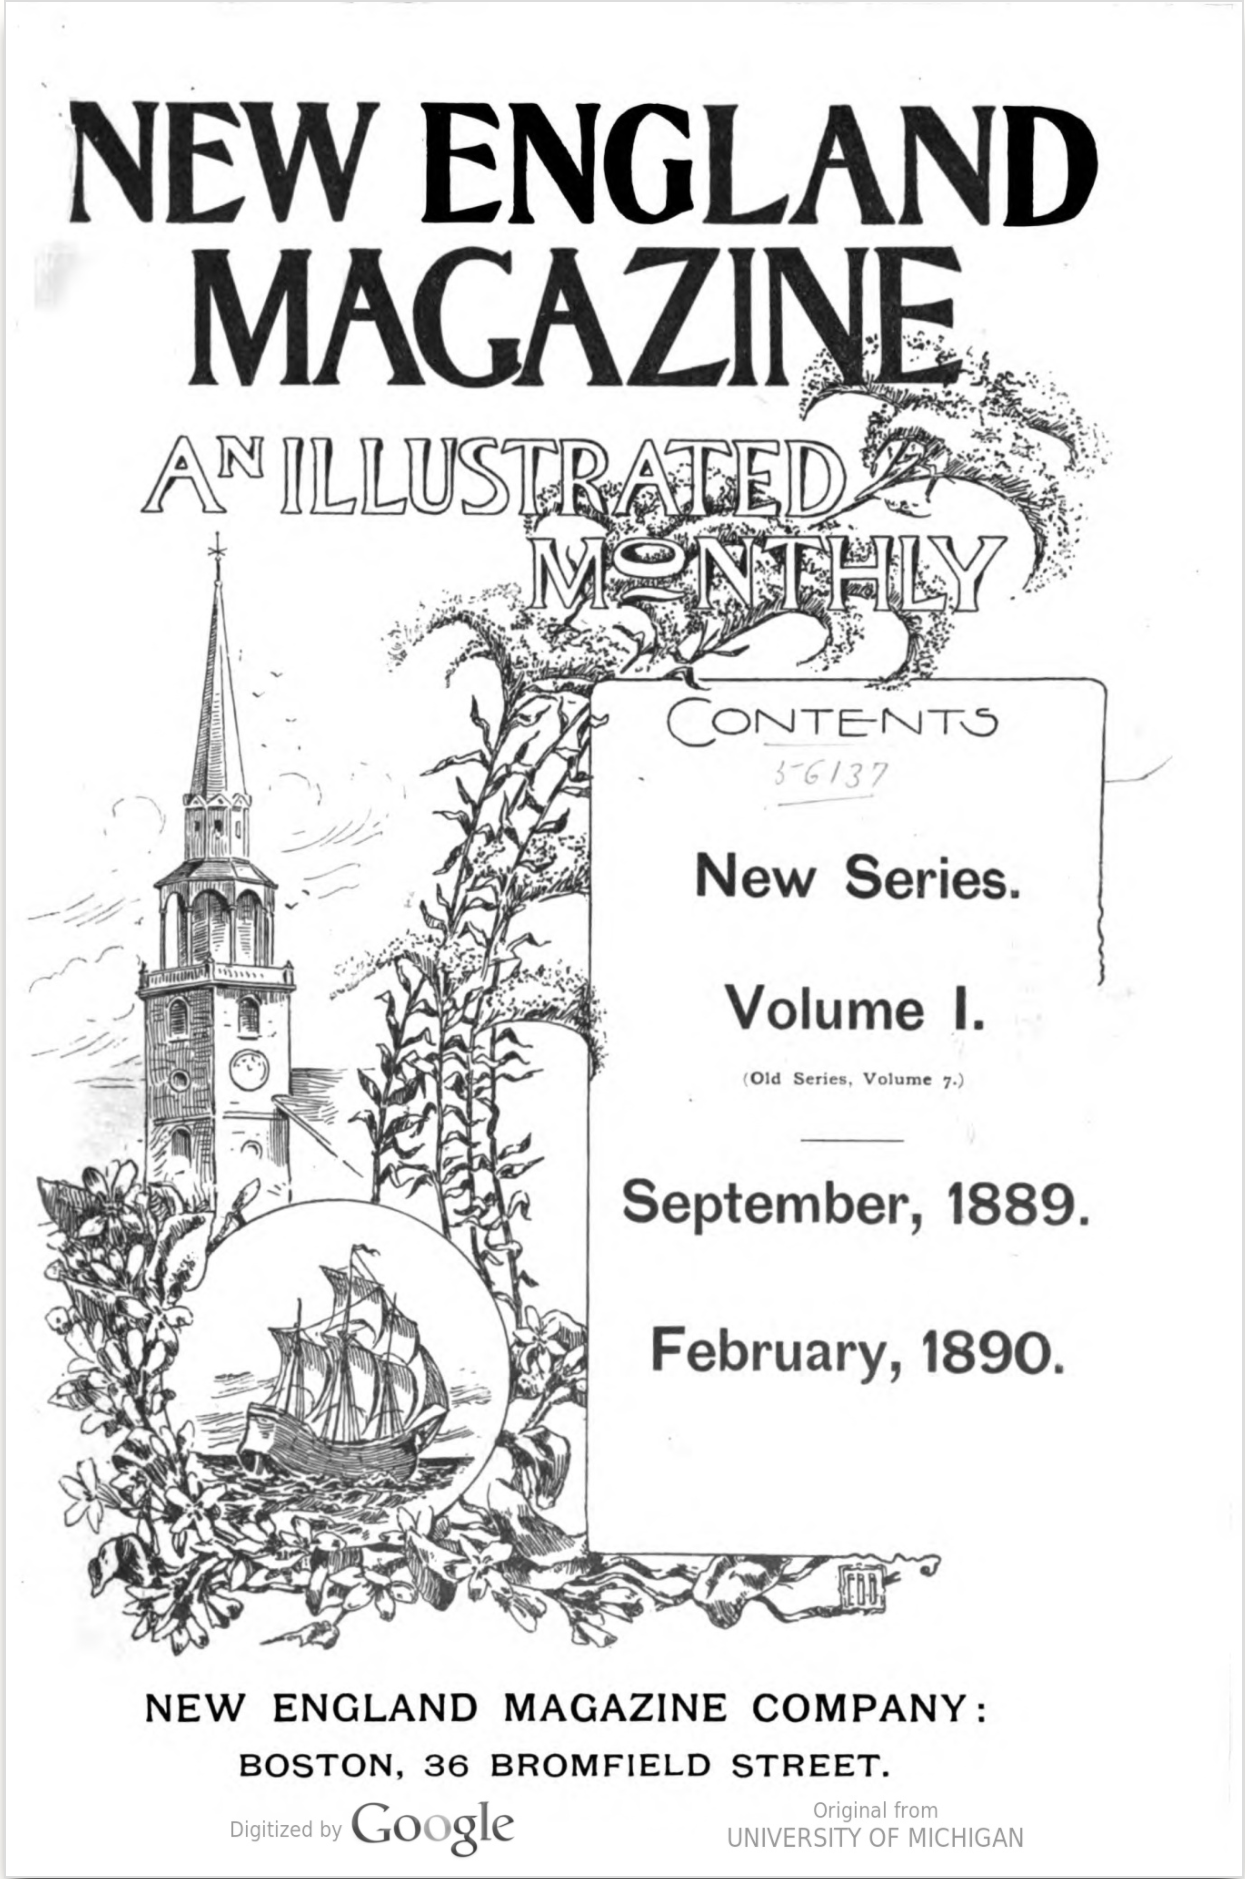 Cover, New England Magazine, an Illustrated Monthly